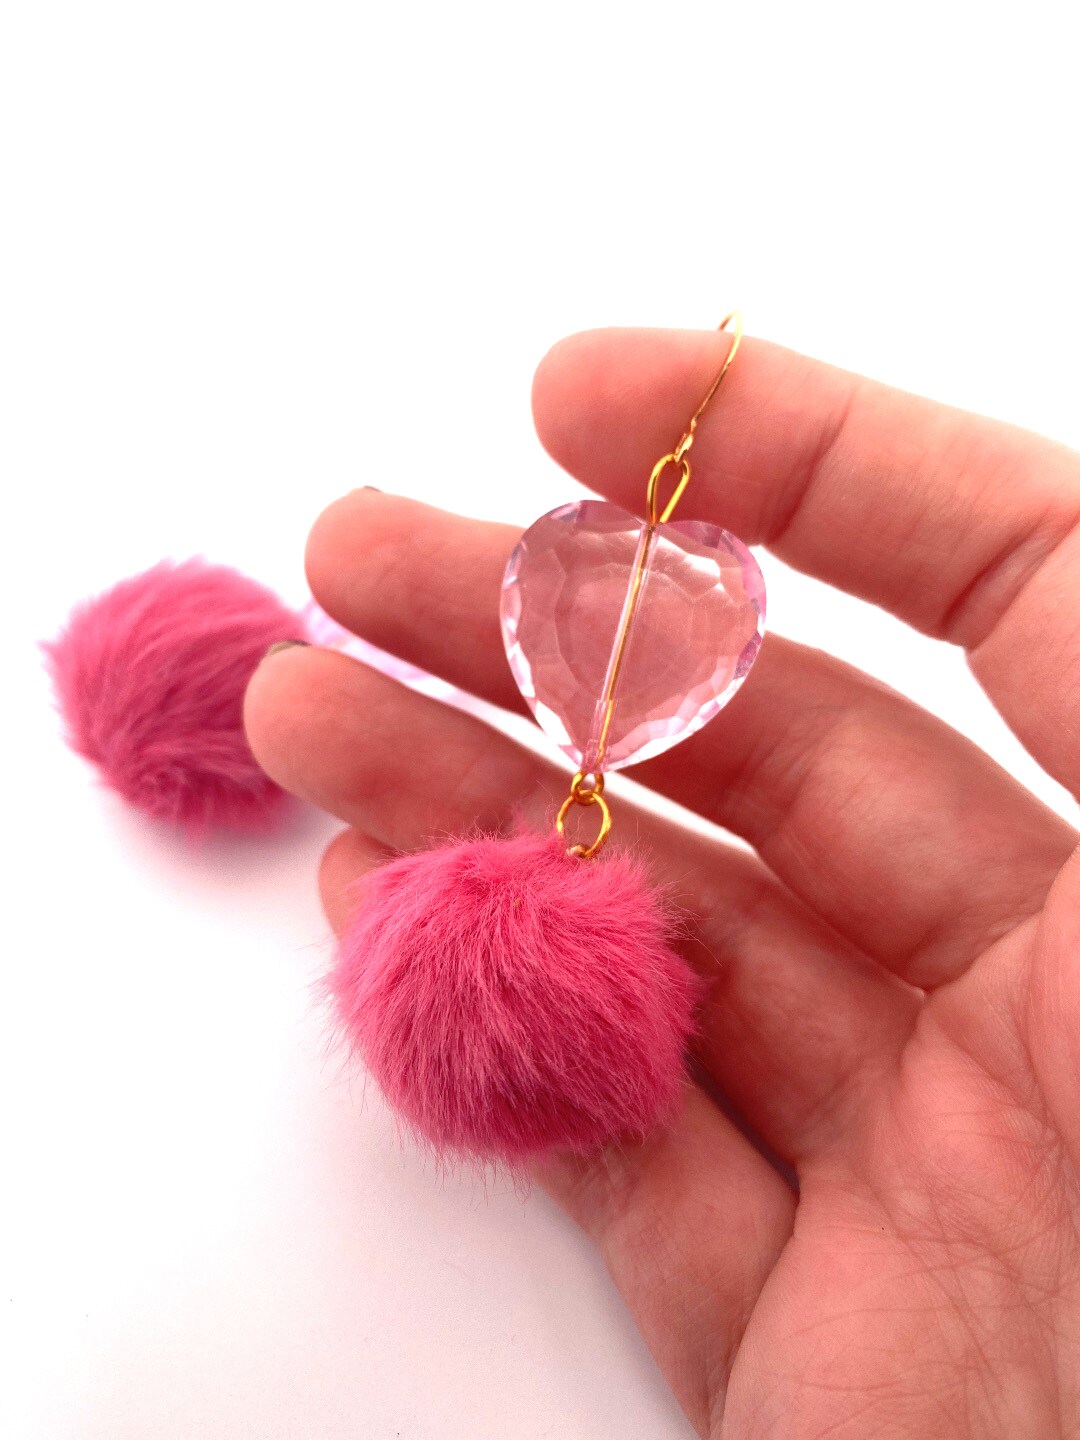 Christmas Pom Pom Earrings · How To Make A Pair Of Fabric Earrings ·  Jewelry Making on Cut Out + Keep